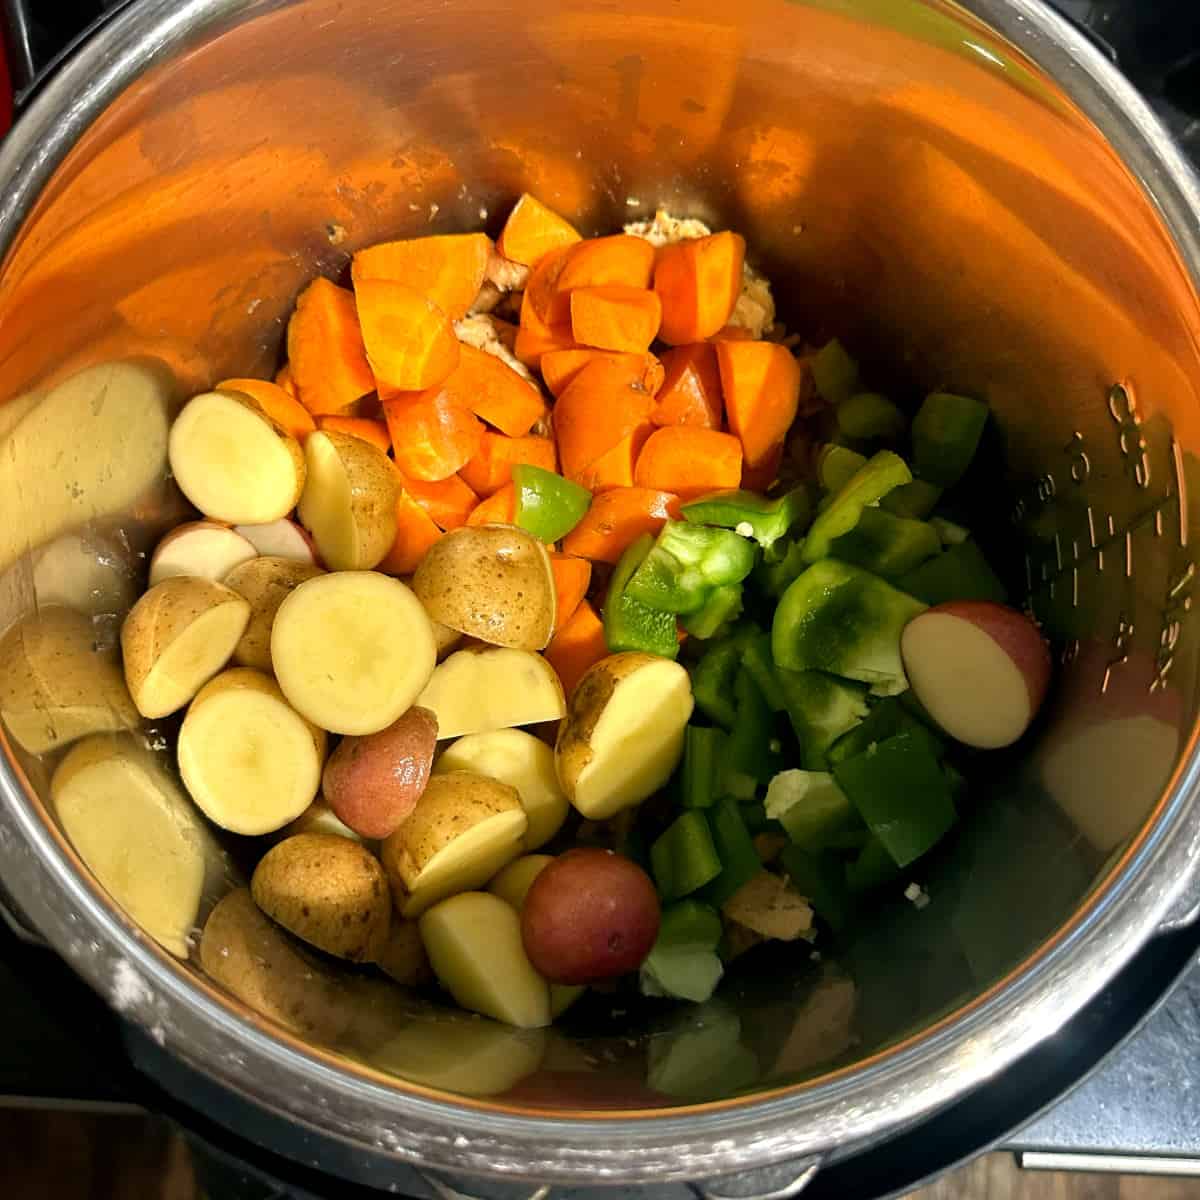 Potatoes, carrots and bell peppers in IP liner.